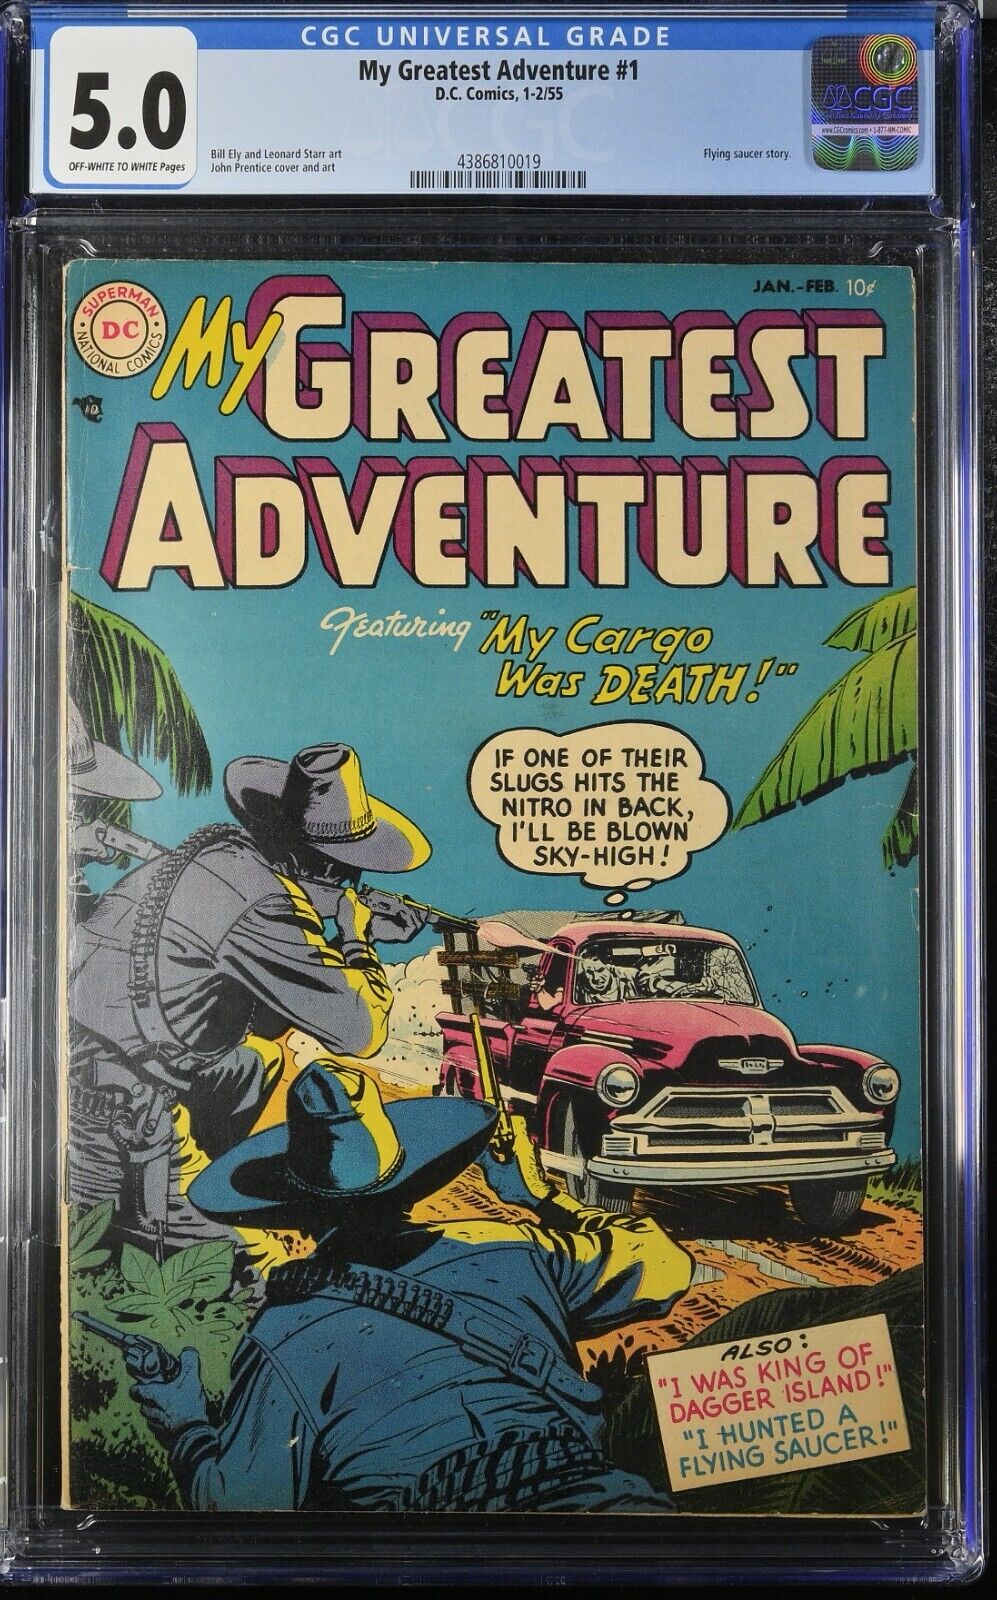 My Greatest Adventure #1 CGC 5.0 DC 1955 Flying Saucer Story Off White Pages